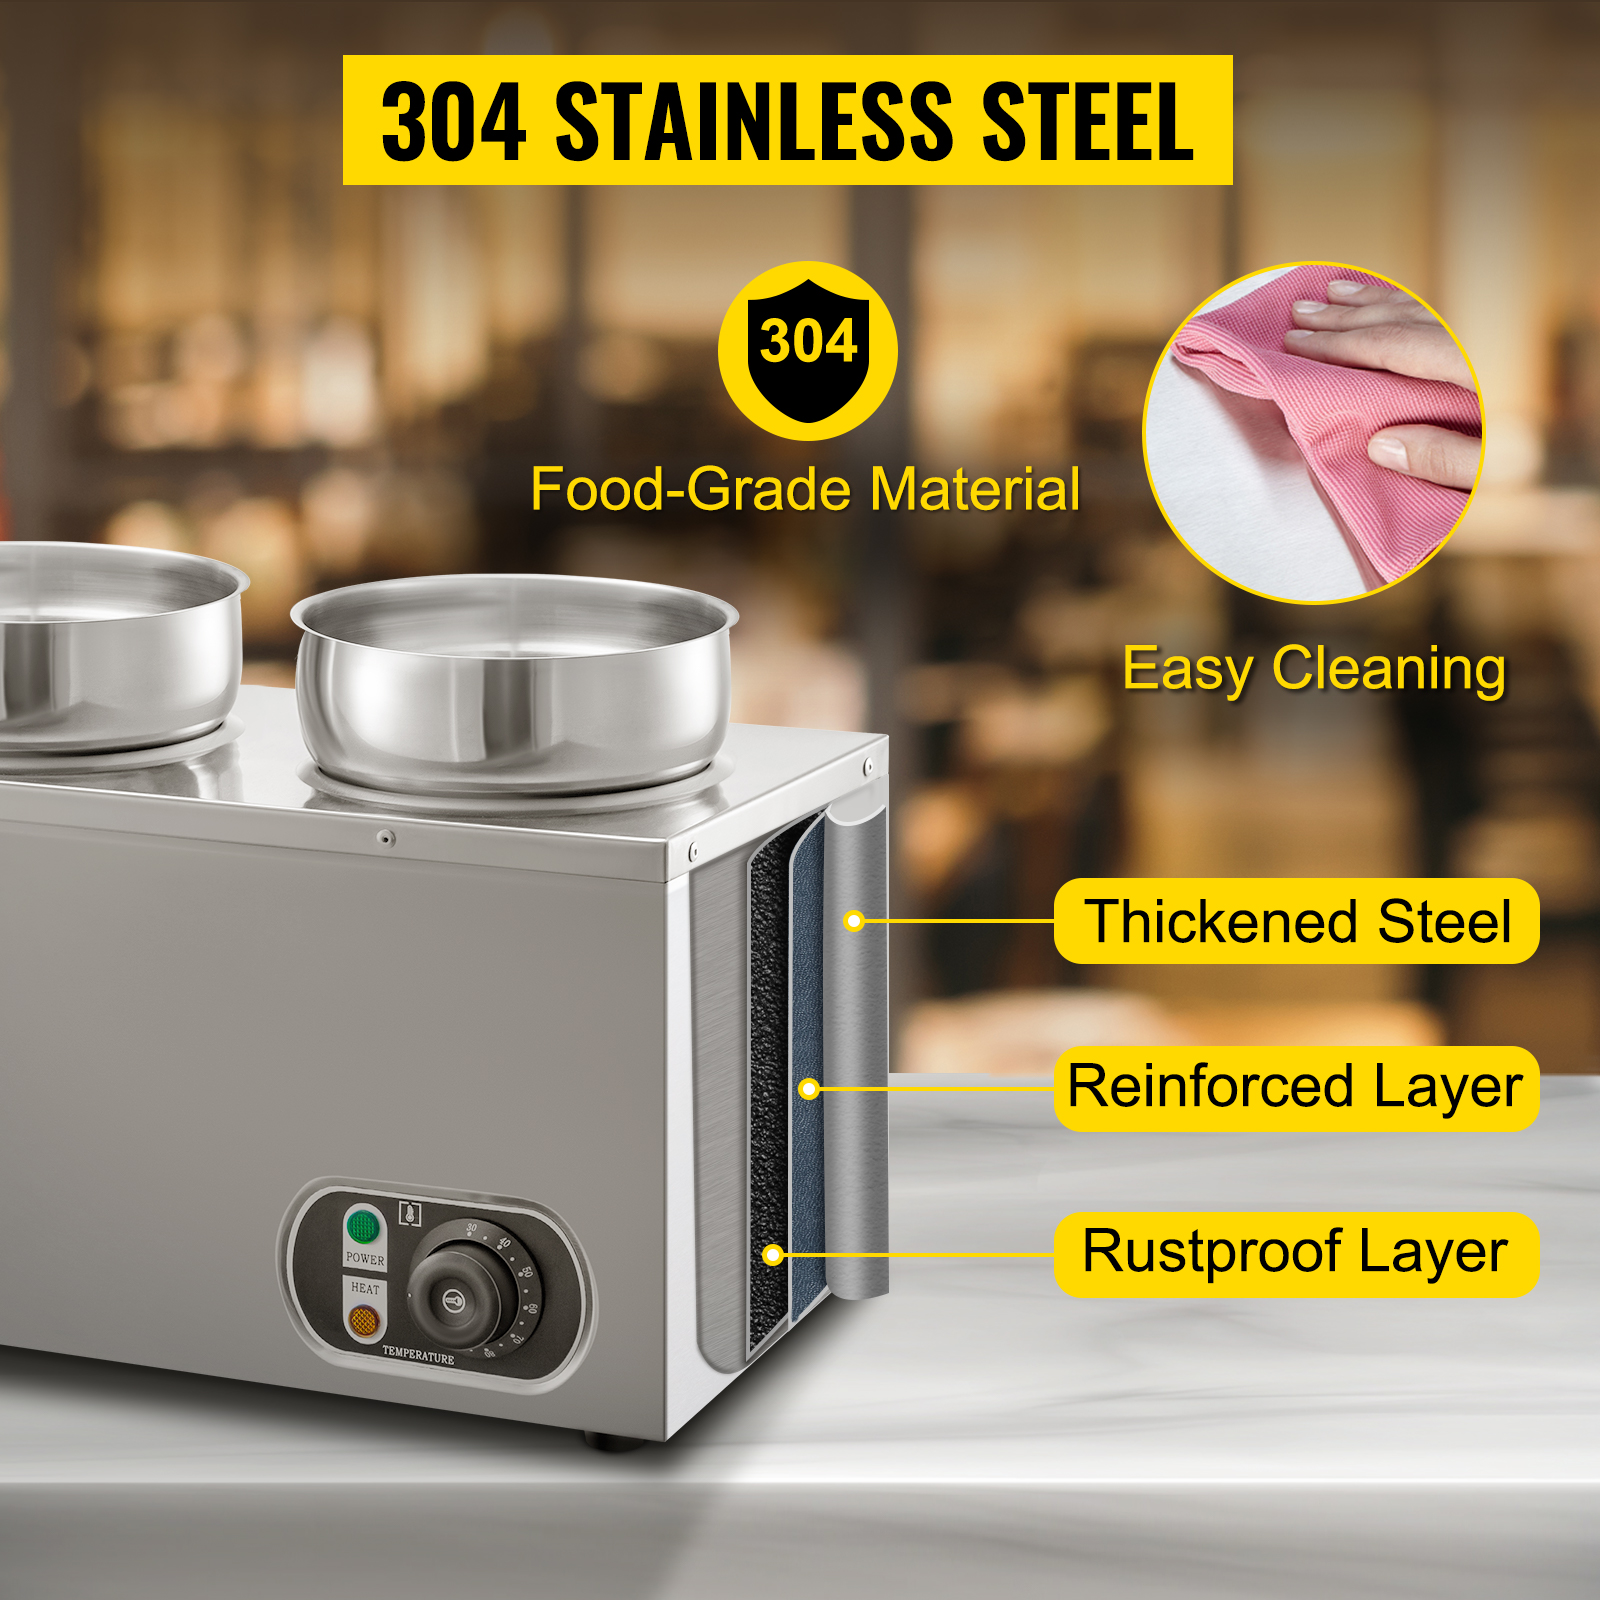 110V Commercial Food Warmer 8.4 Qt Capacity, 500W Electric Soup Warmer  Adjustable Temp.86-185?, Stainless